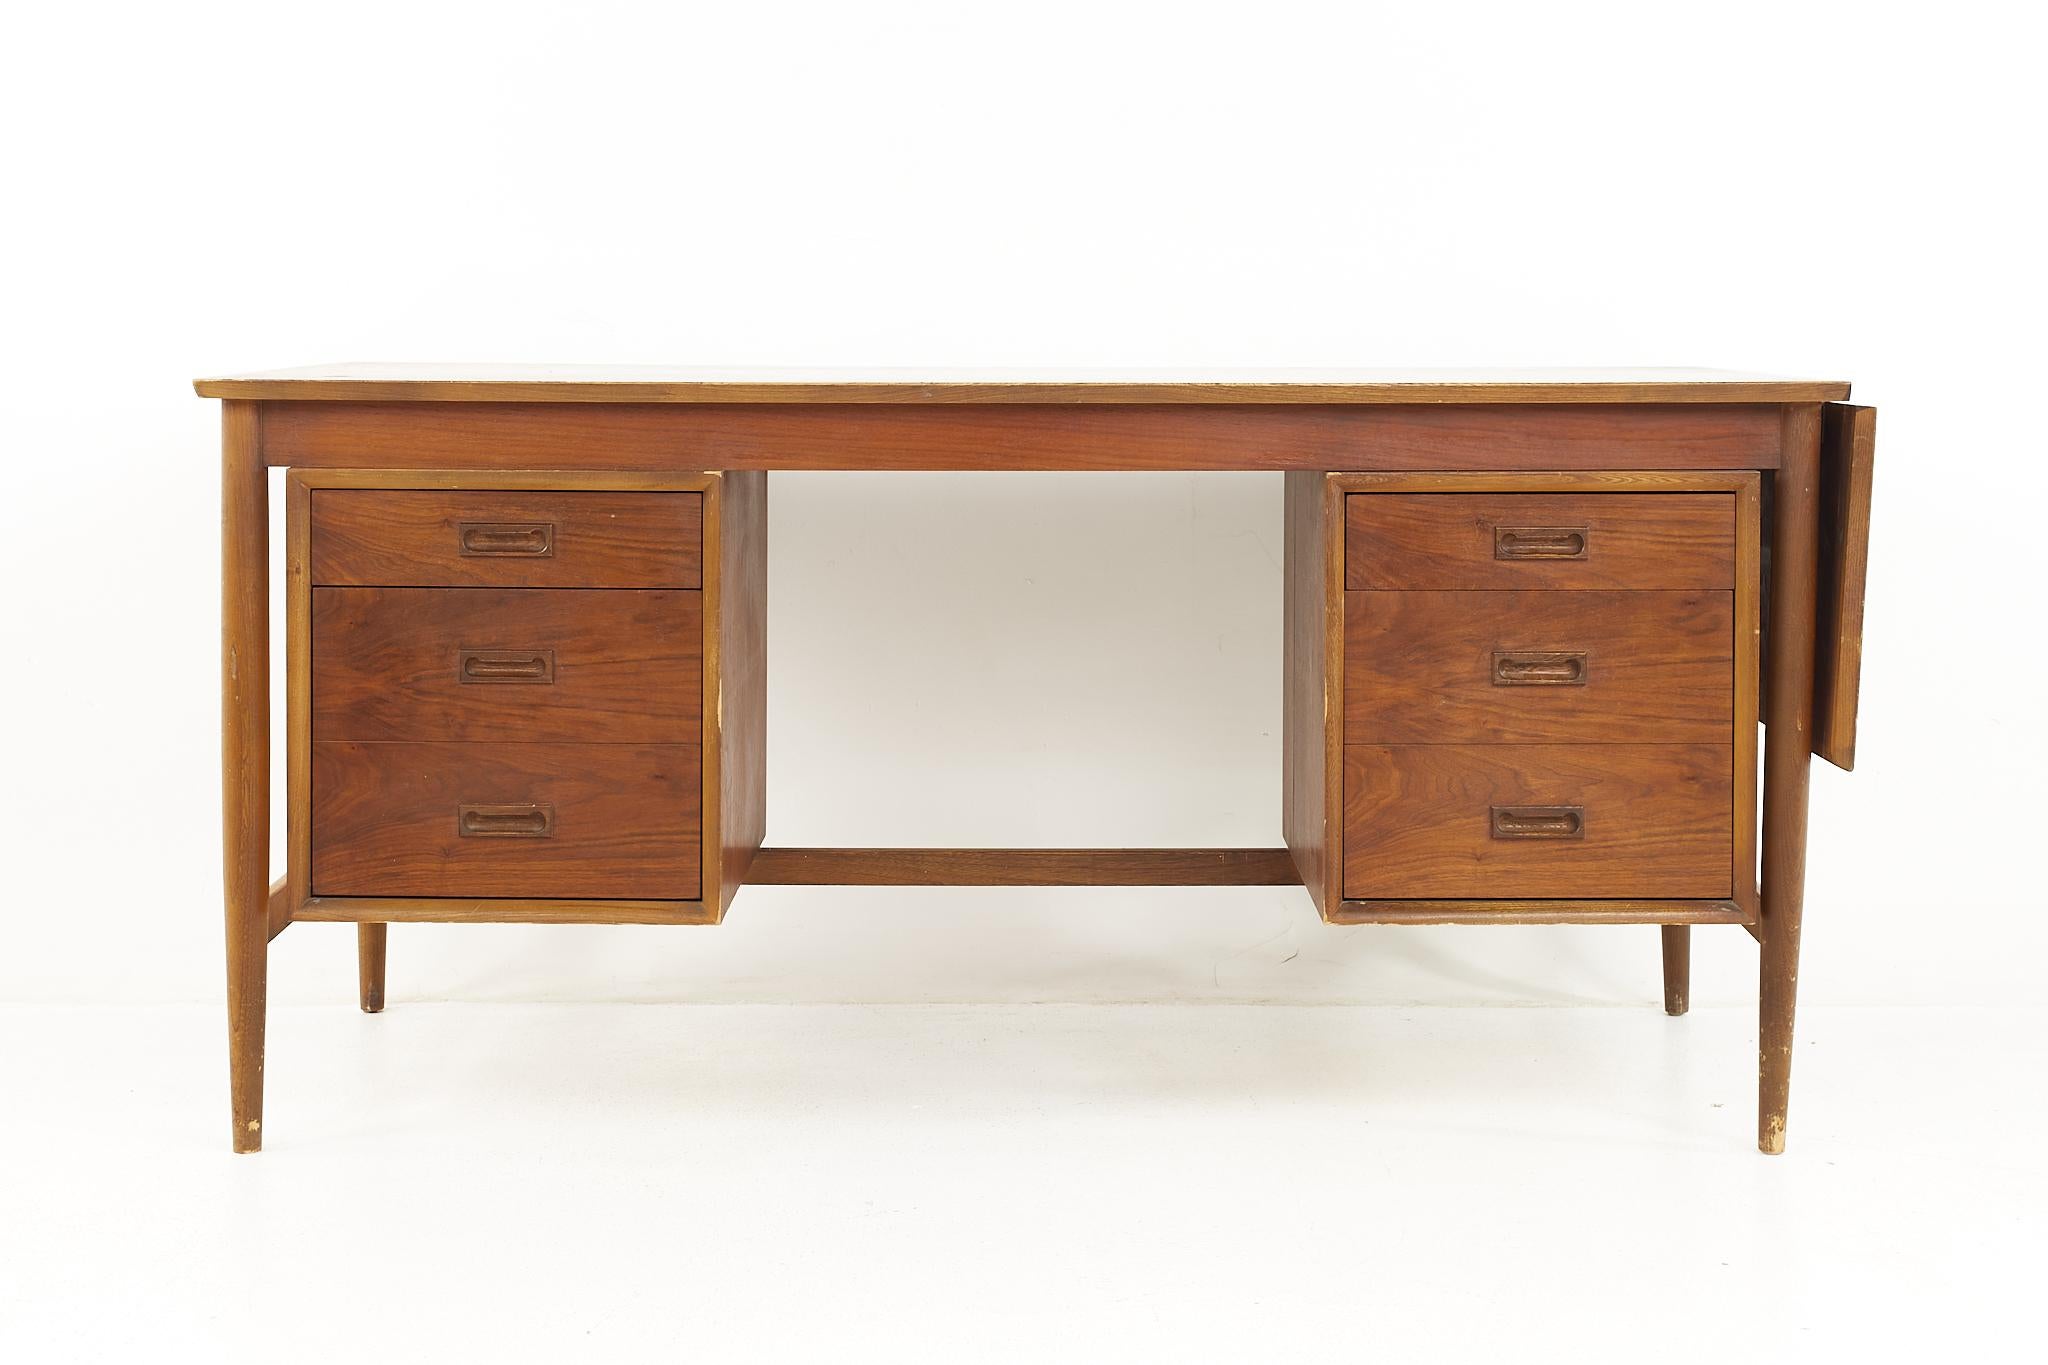 Arne Vodder style mid century Danish walnut desk

The desk measures: 61 wide x 27 deep x 29 high, with a chair clearance of 25.5 inches; when the leaf is used the desk measures 74.5 inches wide 

All pieces of furniture can be had in what we